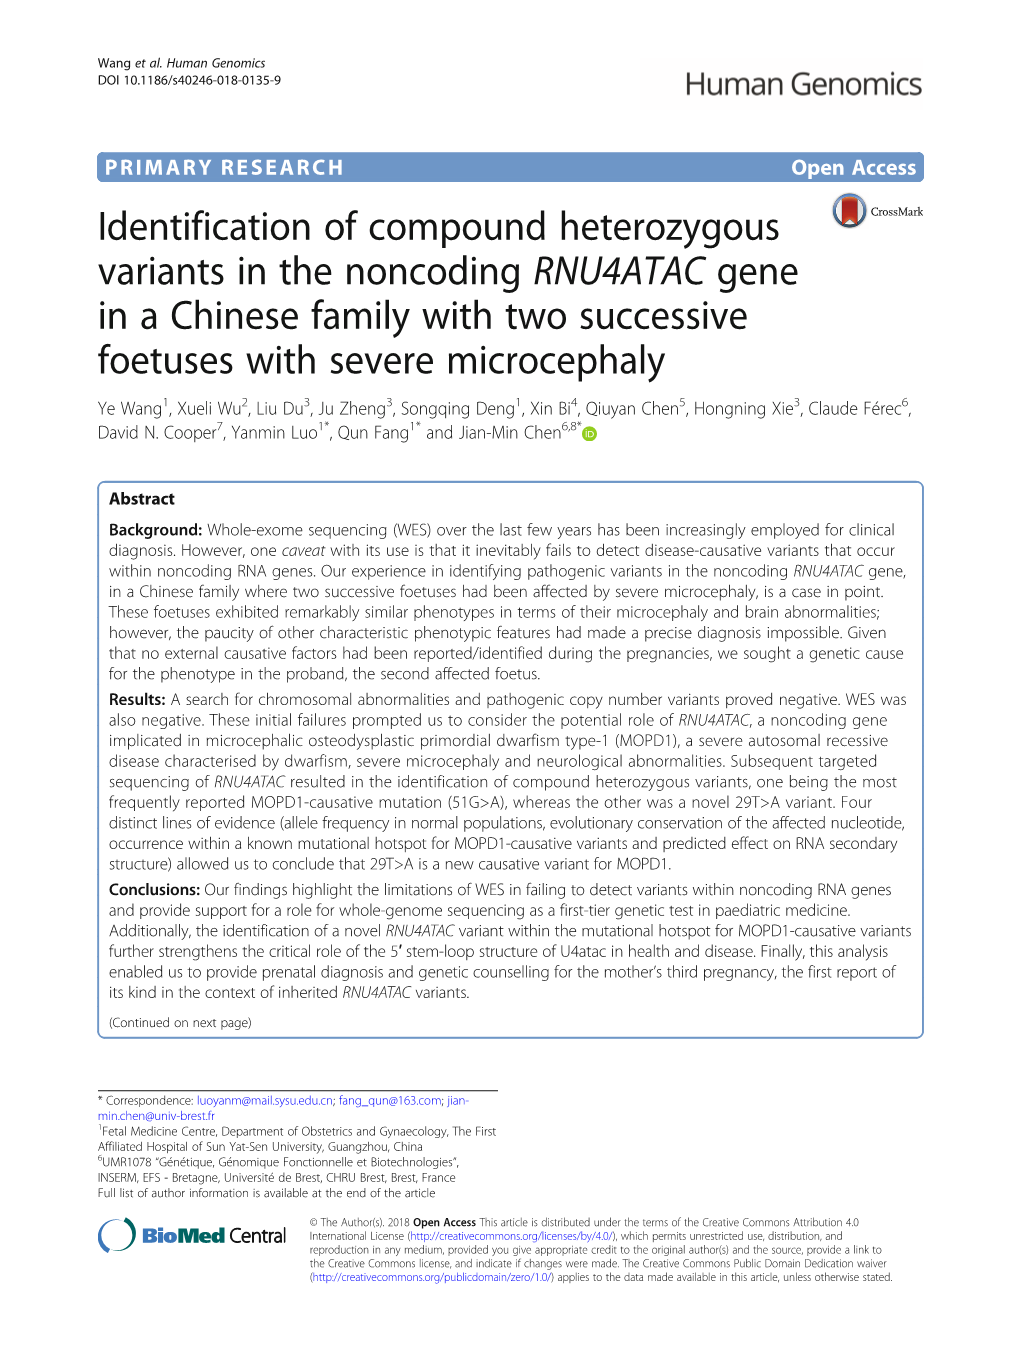 Identification of Compound Heterozygous Variants in The